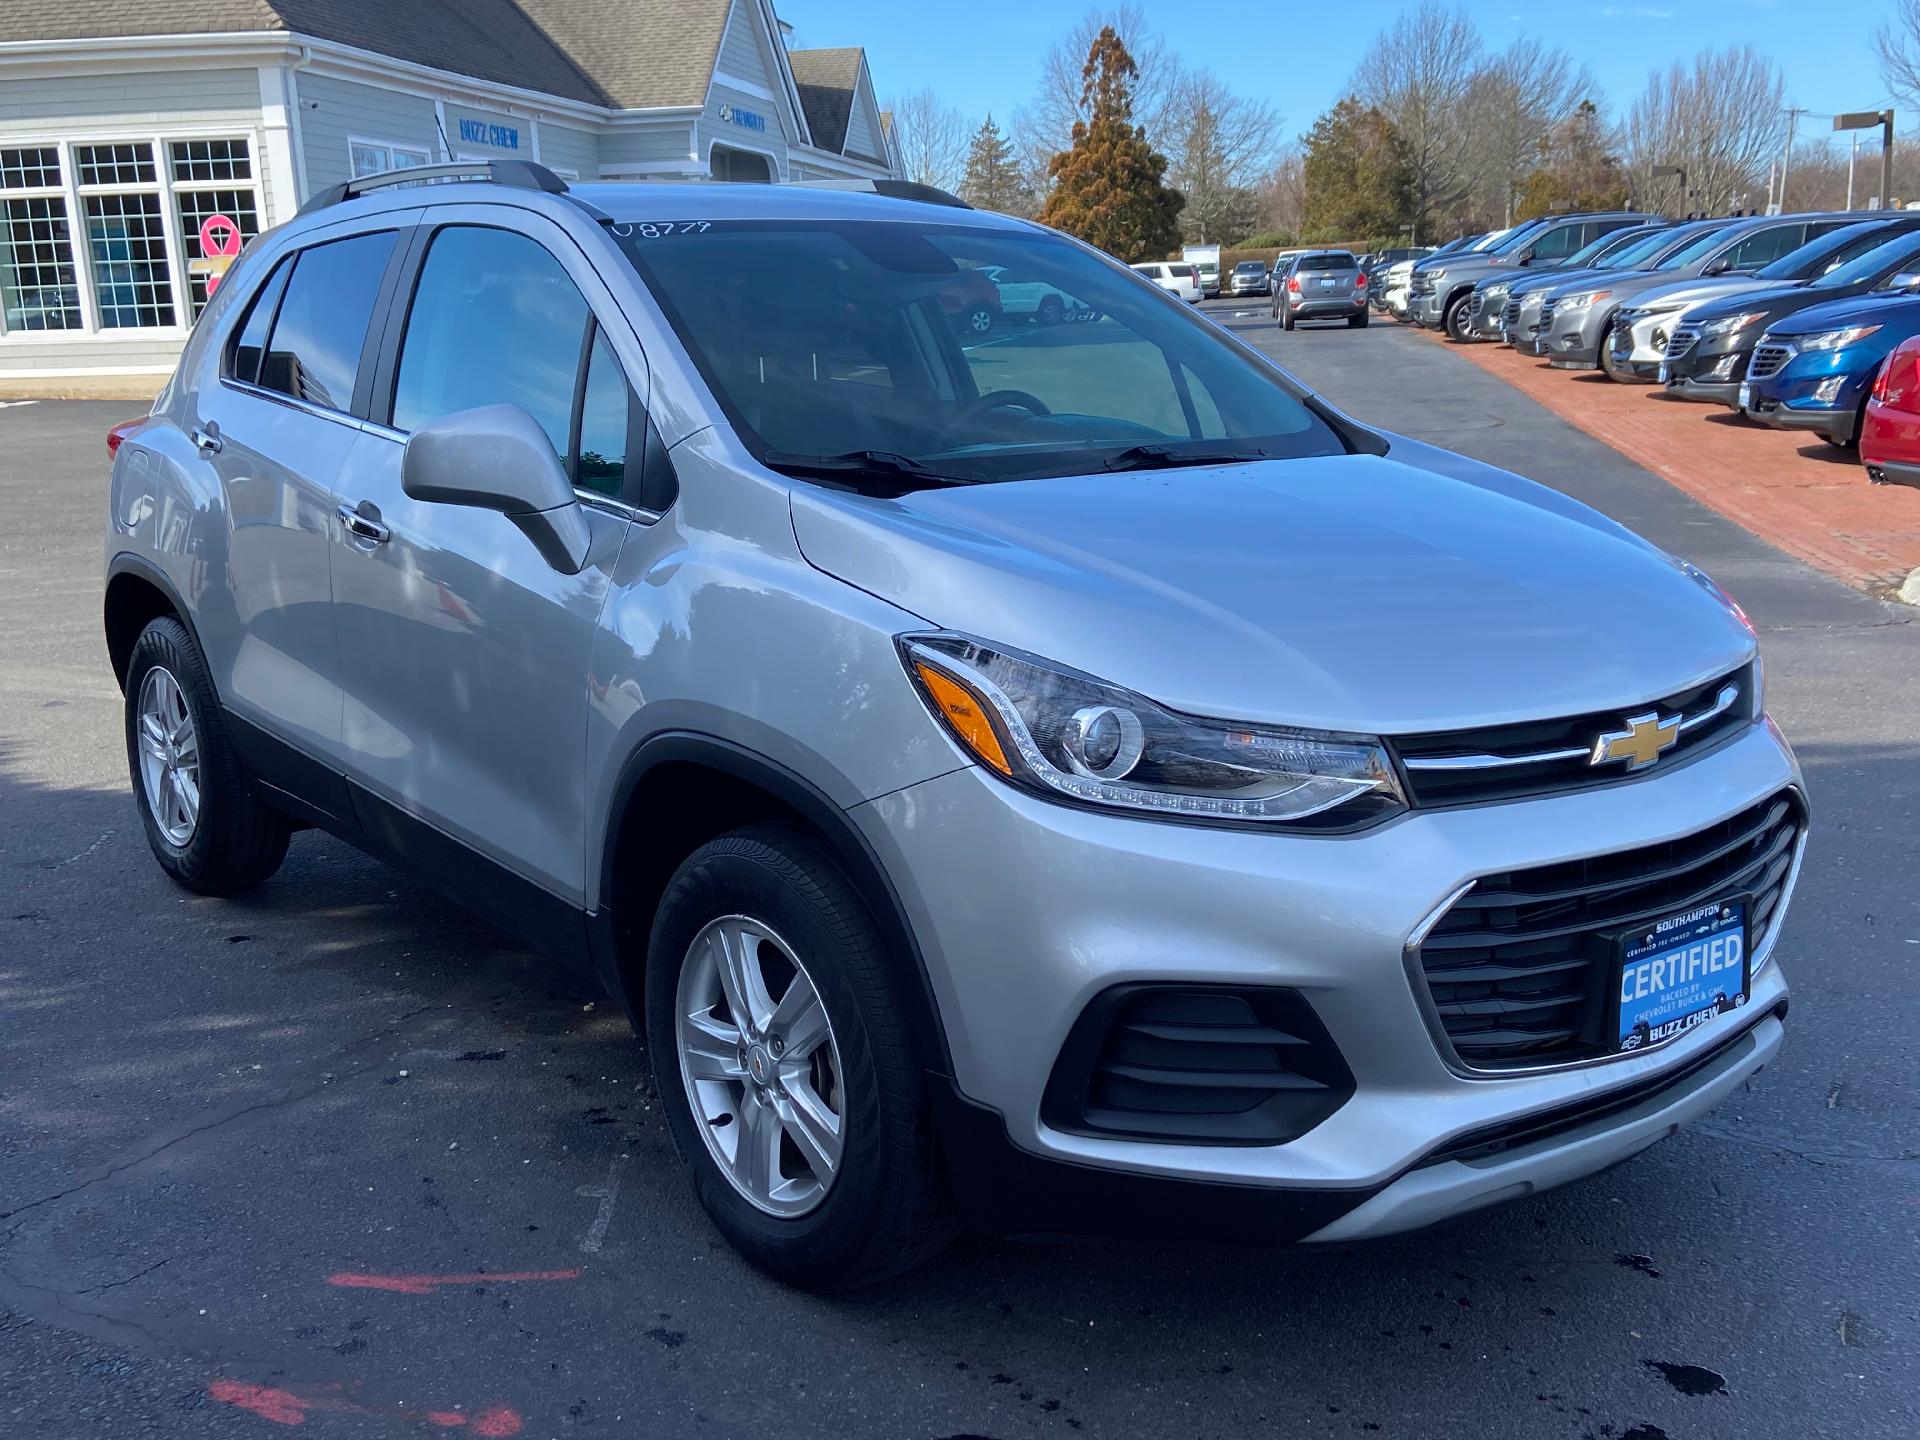 Certified 2019 Chevrolet Trax for Sale at Buzz Chew Chevrolet